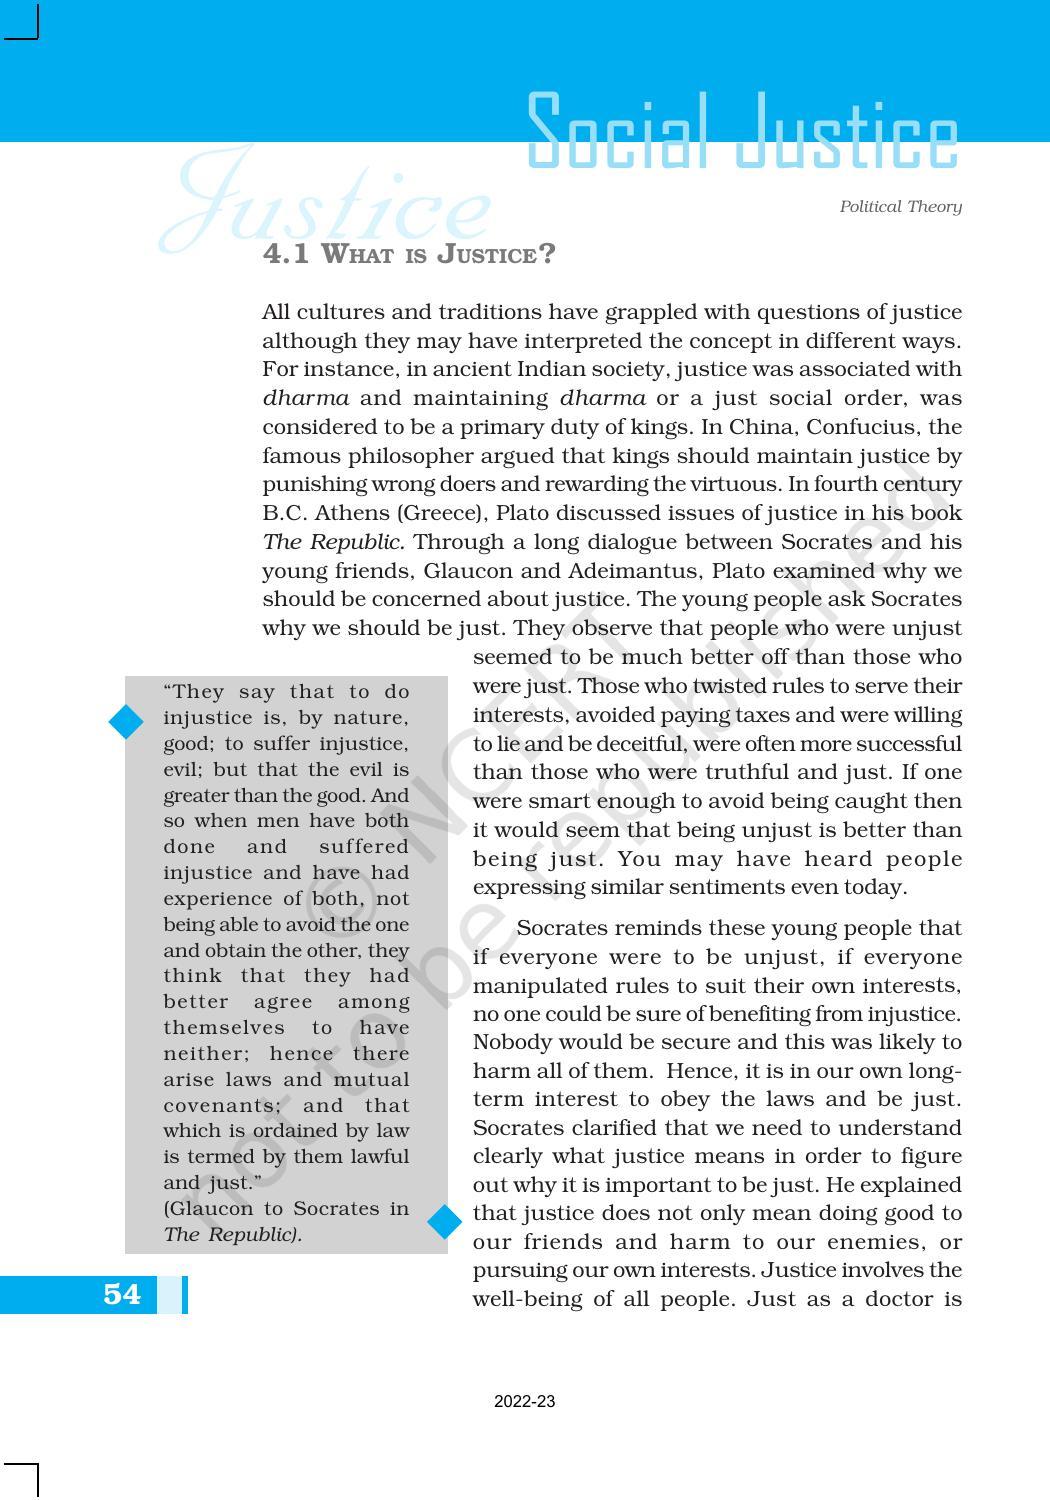 NCERT Book for Class 11 Political Science (Political Theory) Chapter 4 Social Justice - Page 2